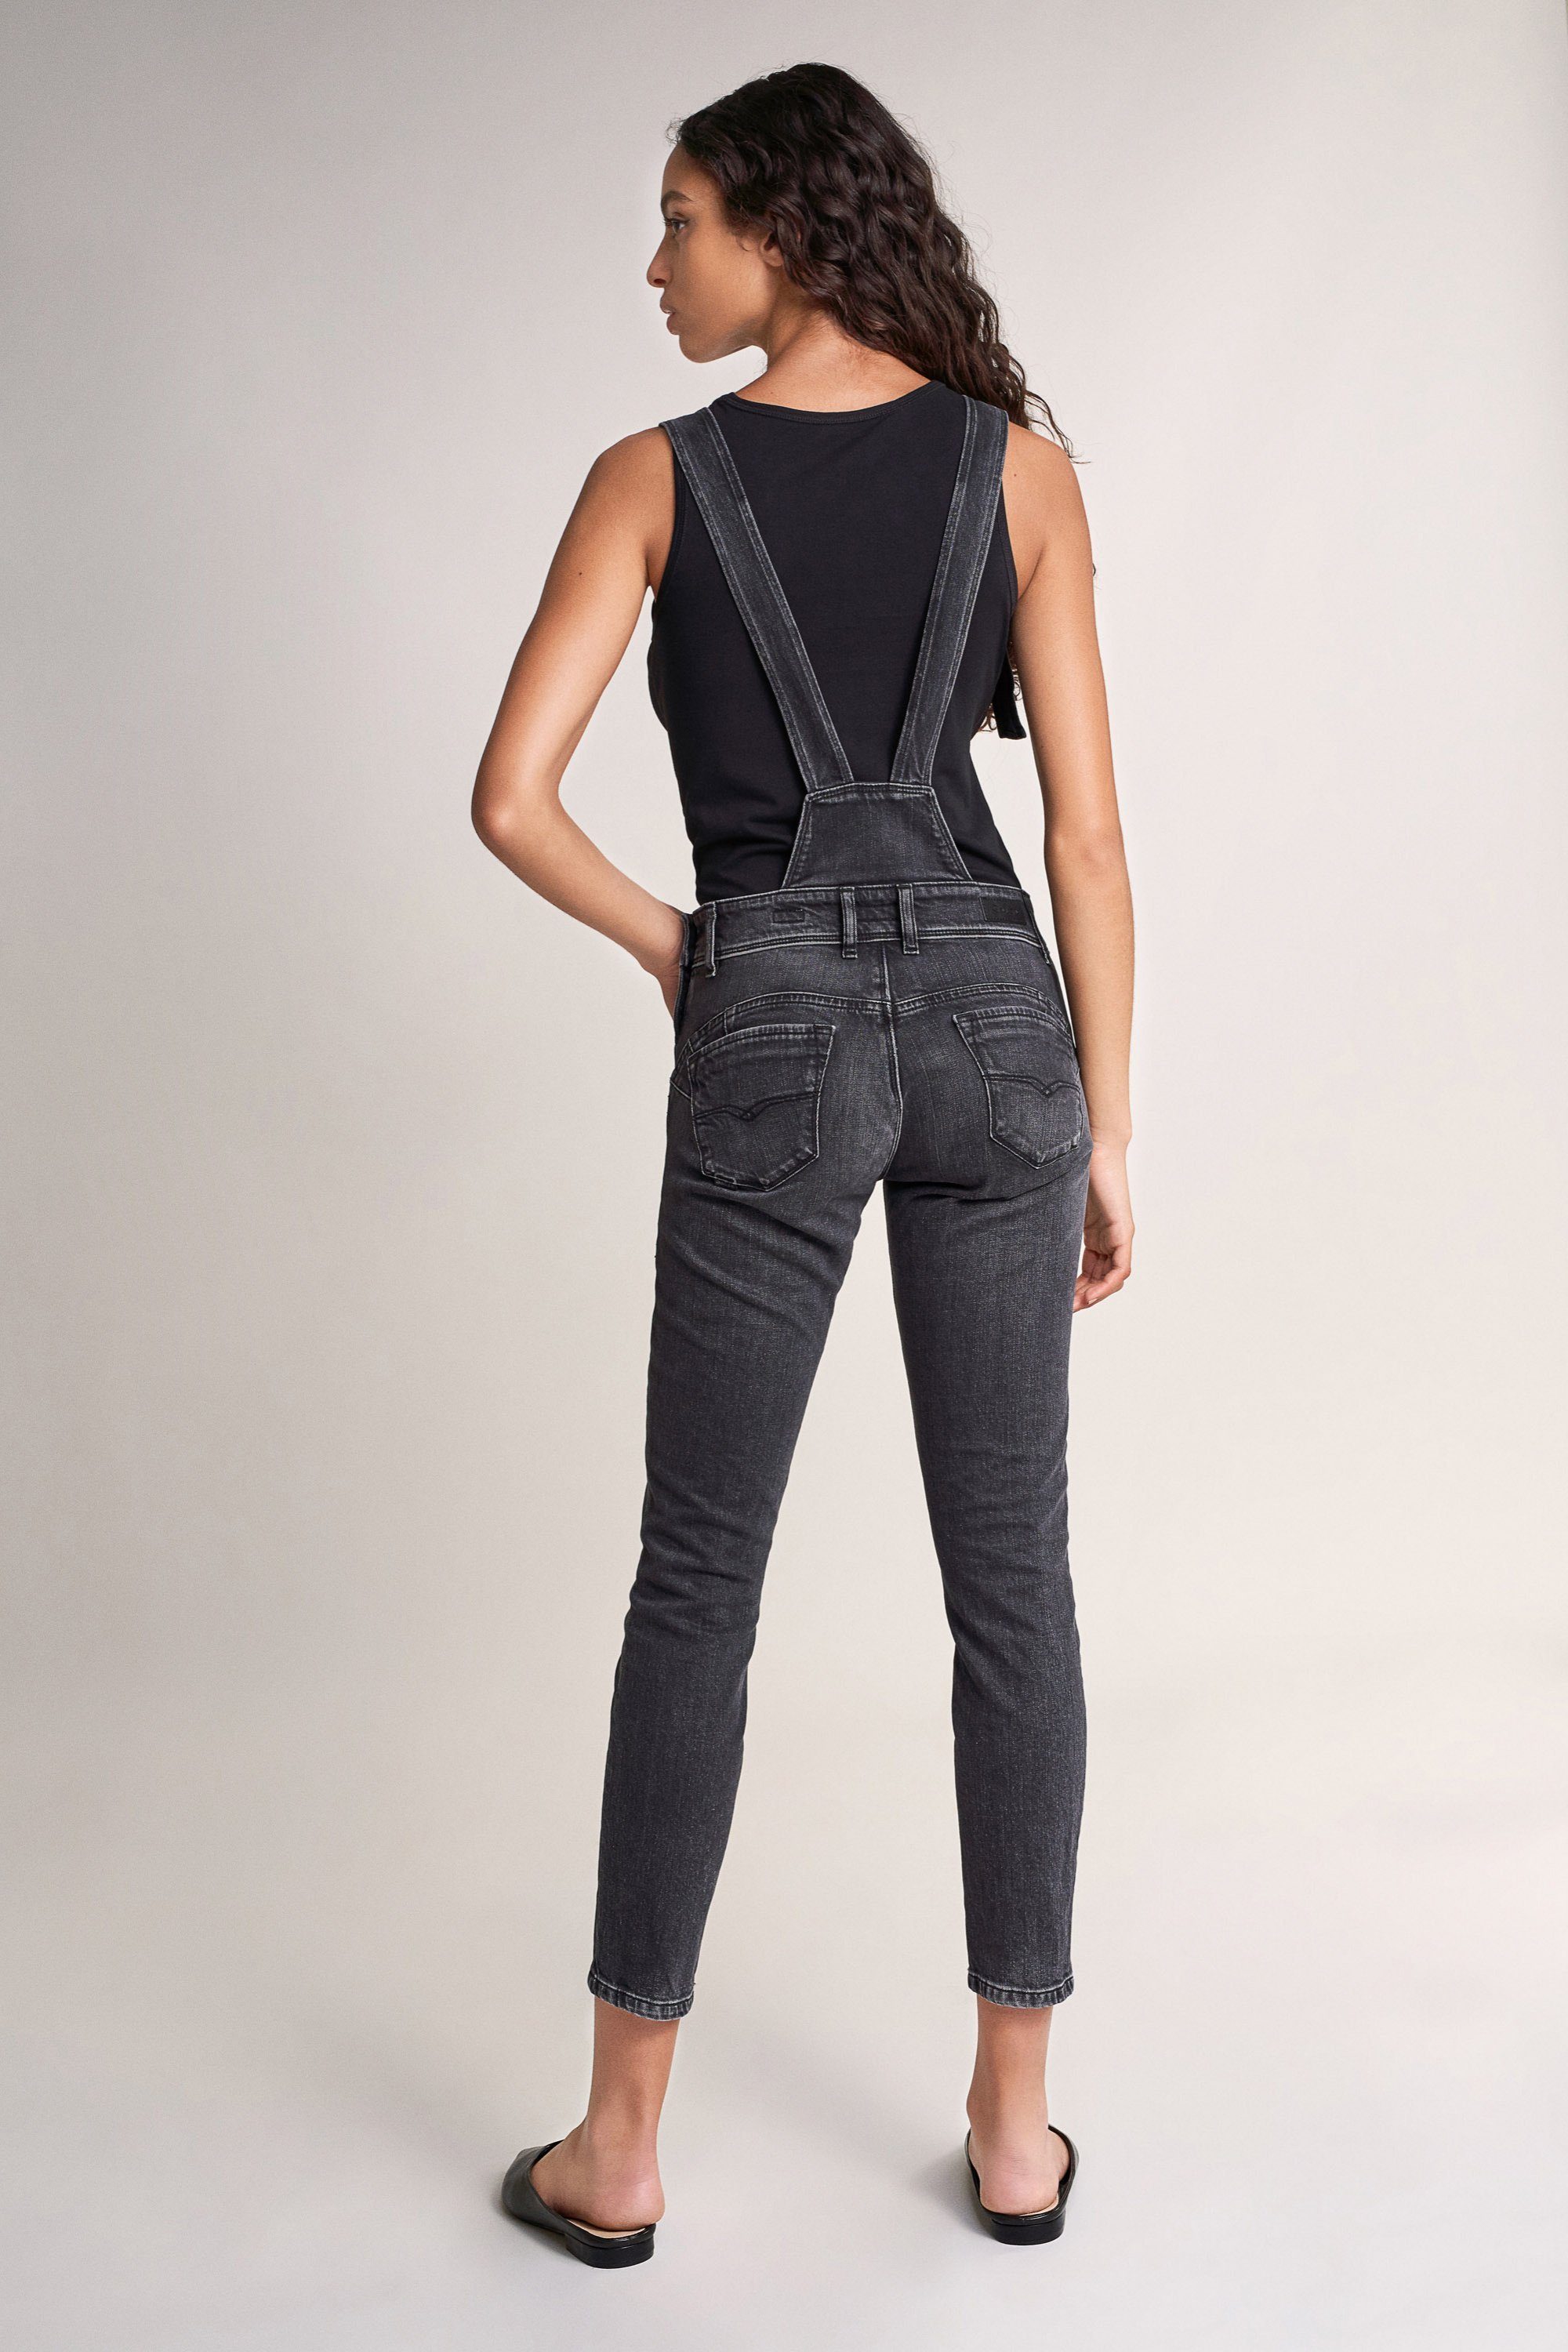 grey out Stretch-Jeans JEANS OVERALL washed WONDER UP SALSA PUSH Salsa 123892.0000 CAPRI